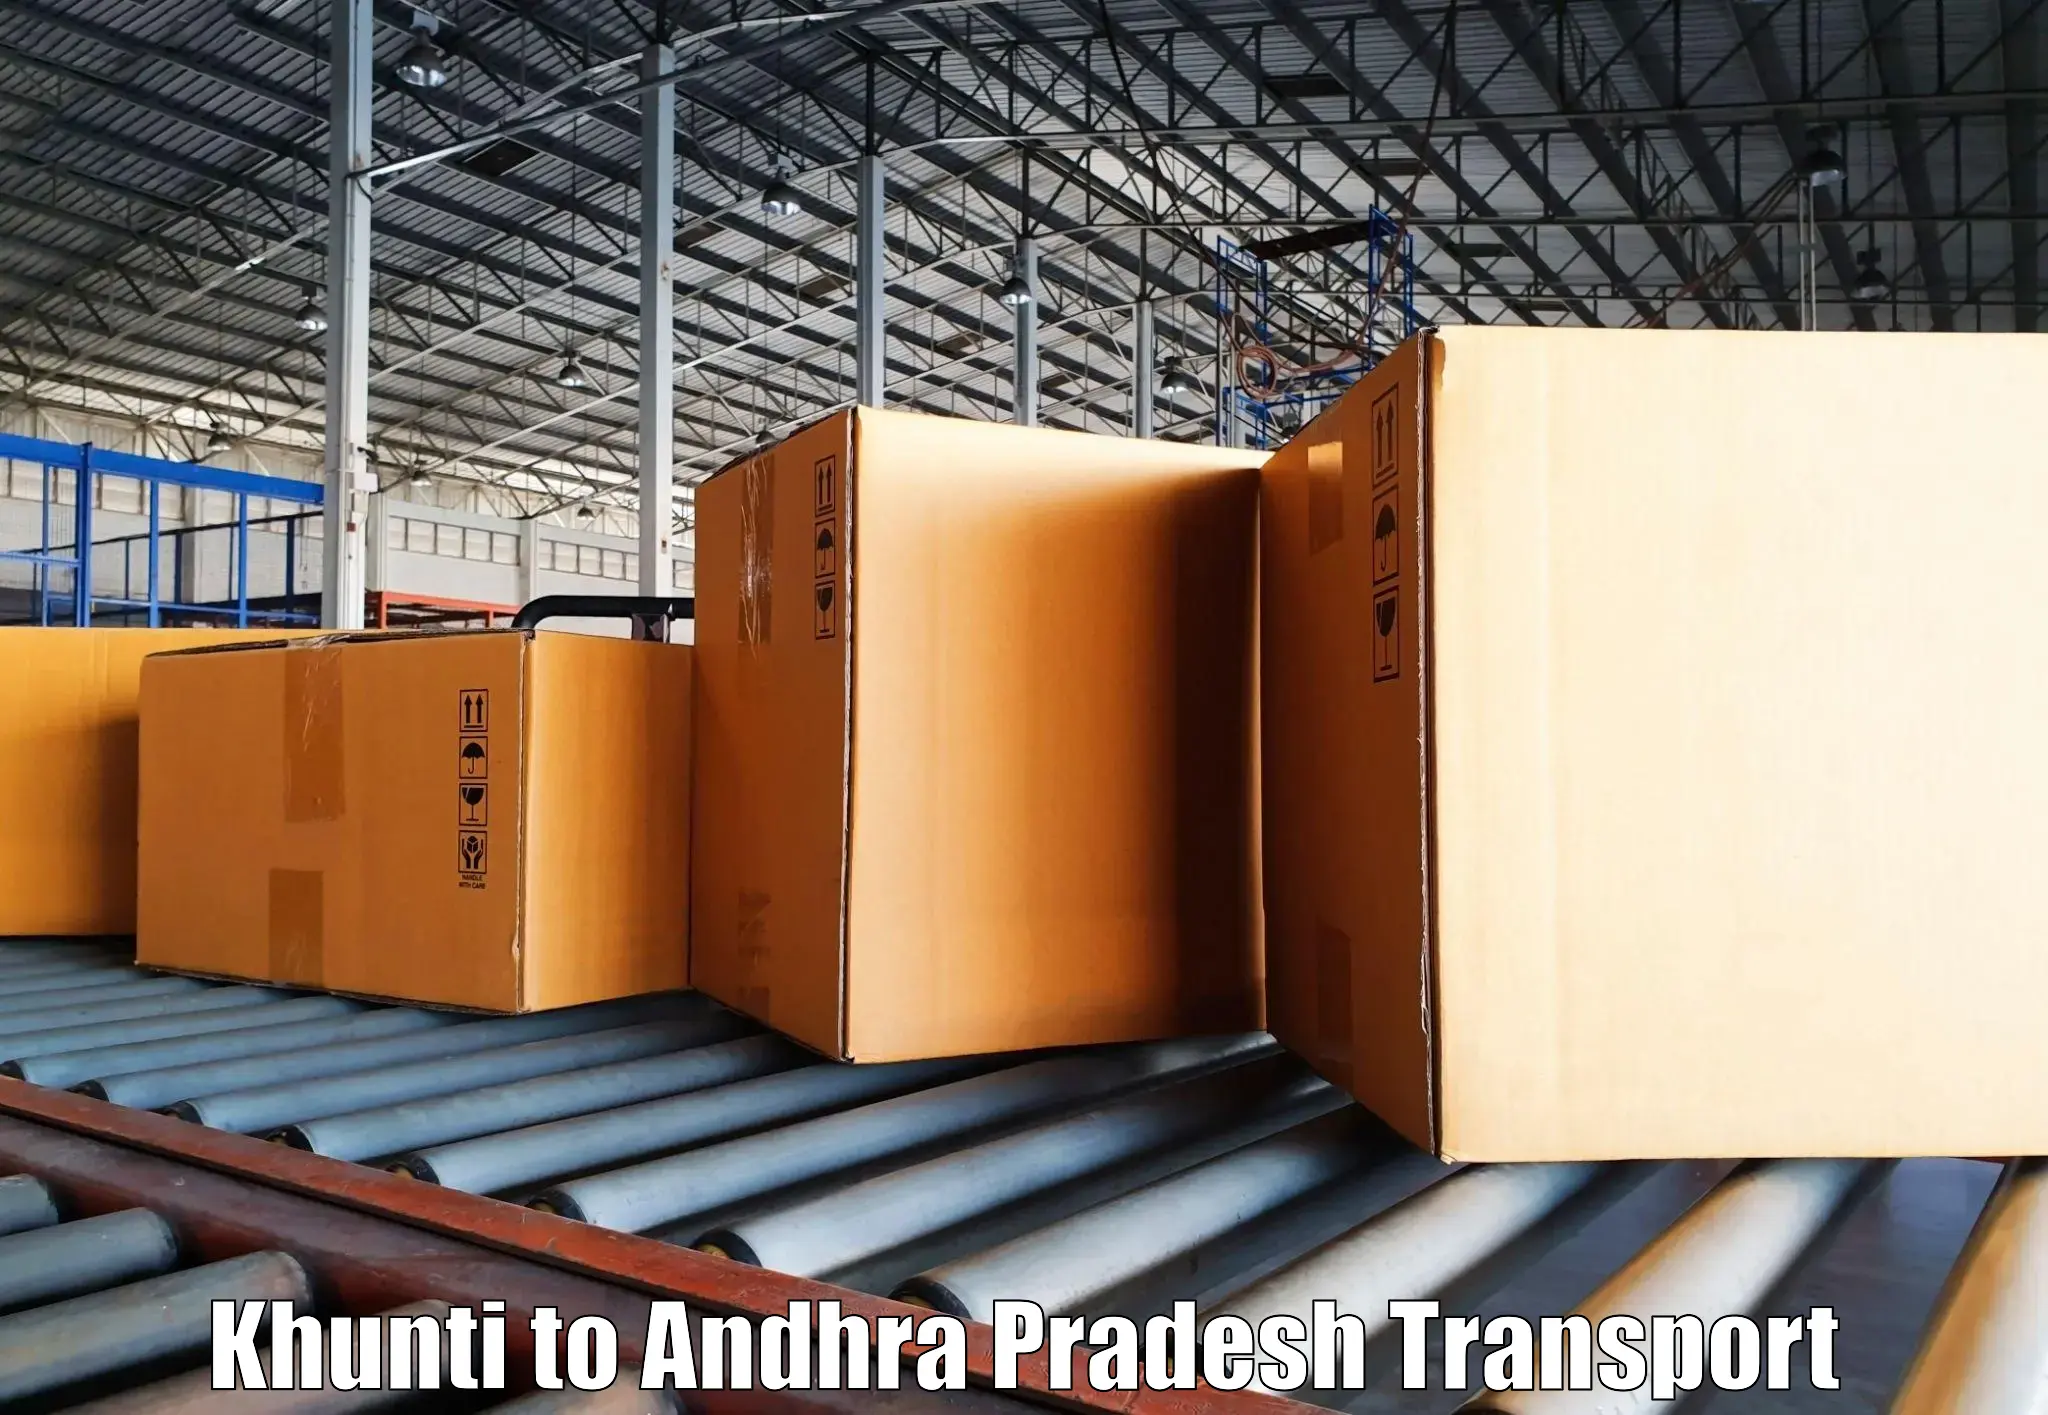 Container transport service Khunti to Visakhapatnam